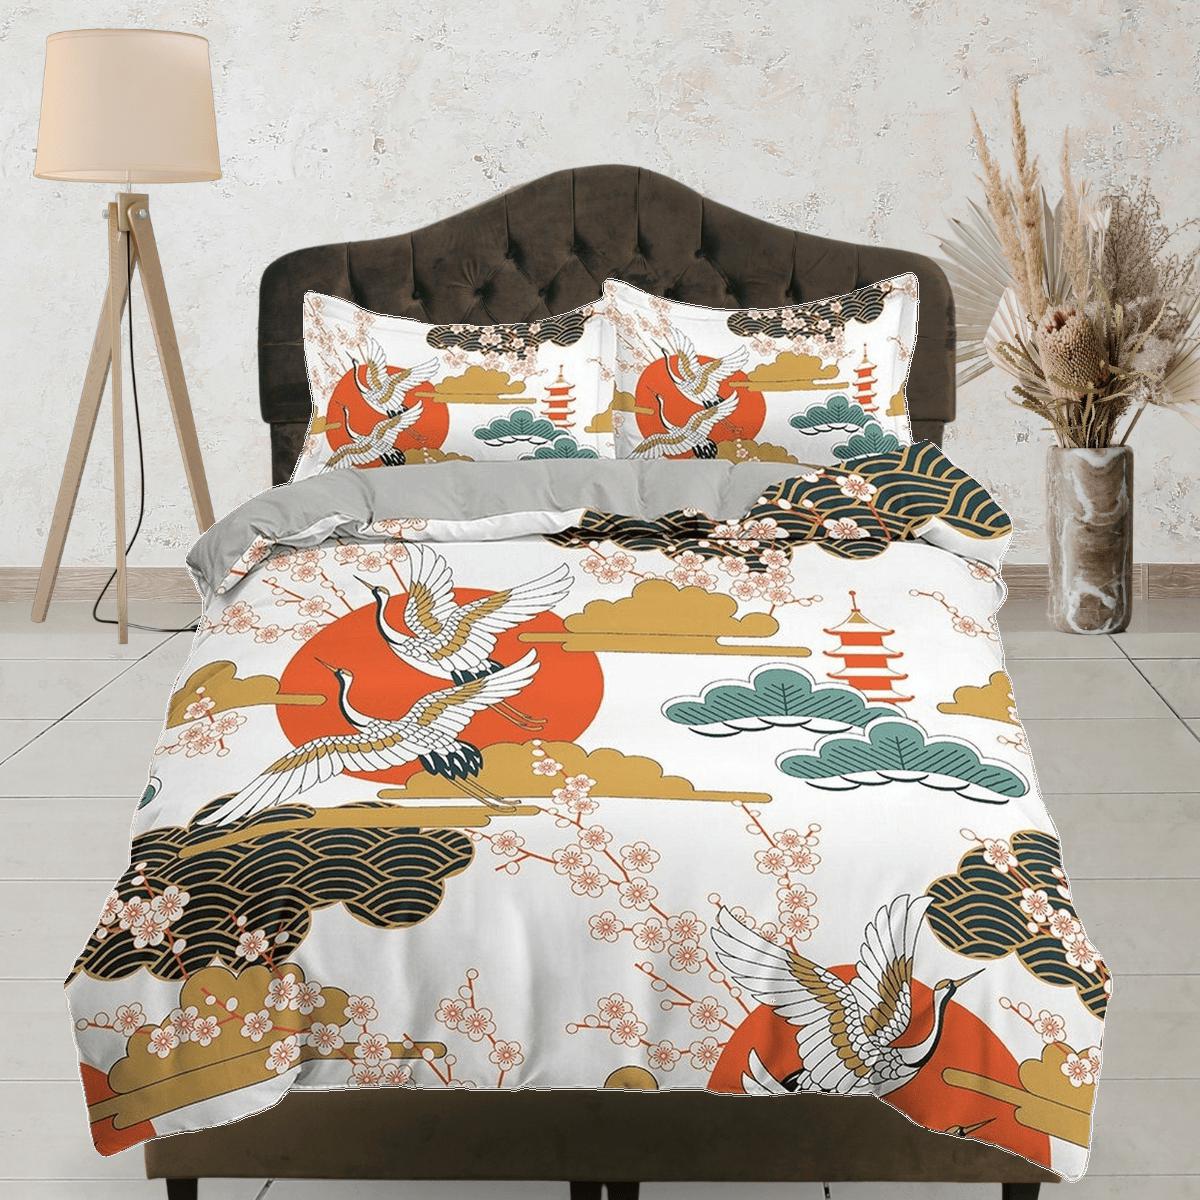 daintyduvet White oriental bedding with floral prints, pagoda, crane bird design, Asian duvet cover set with cherry blossom, Japanese bedding